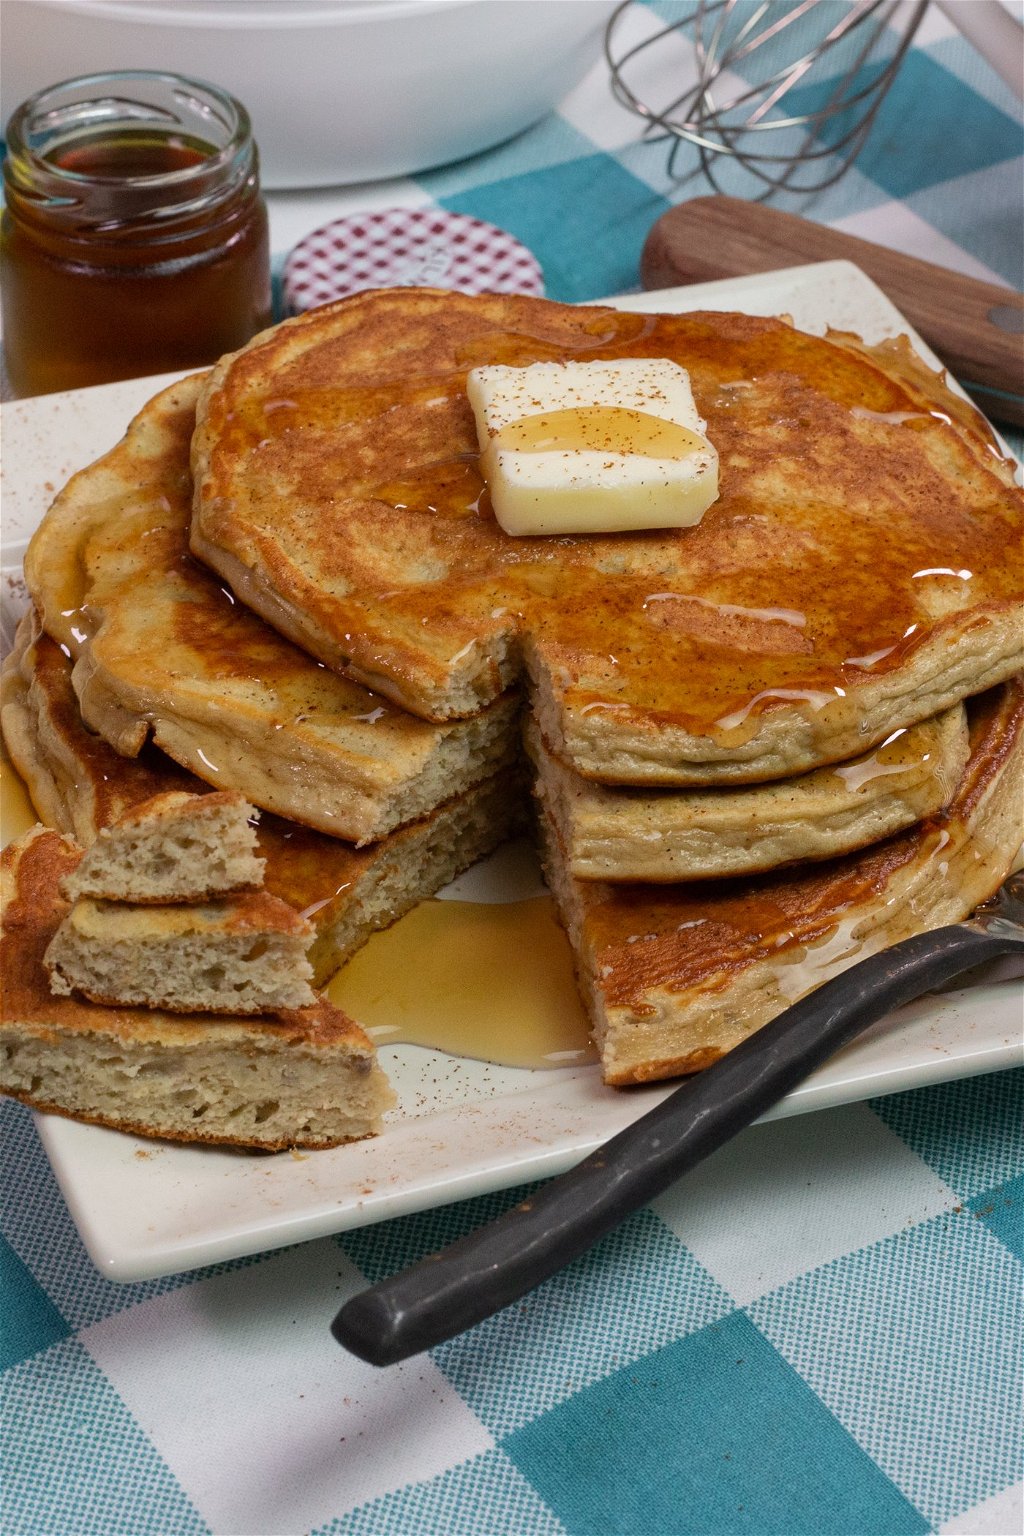 https://media.theproteinchef.co/wp-content/uploads/2020/03/5-Ingredient-Fluffy-Protein-Pancakes-Recipe.jpg